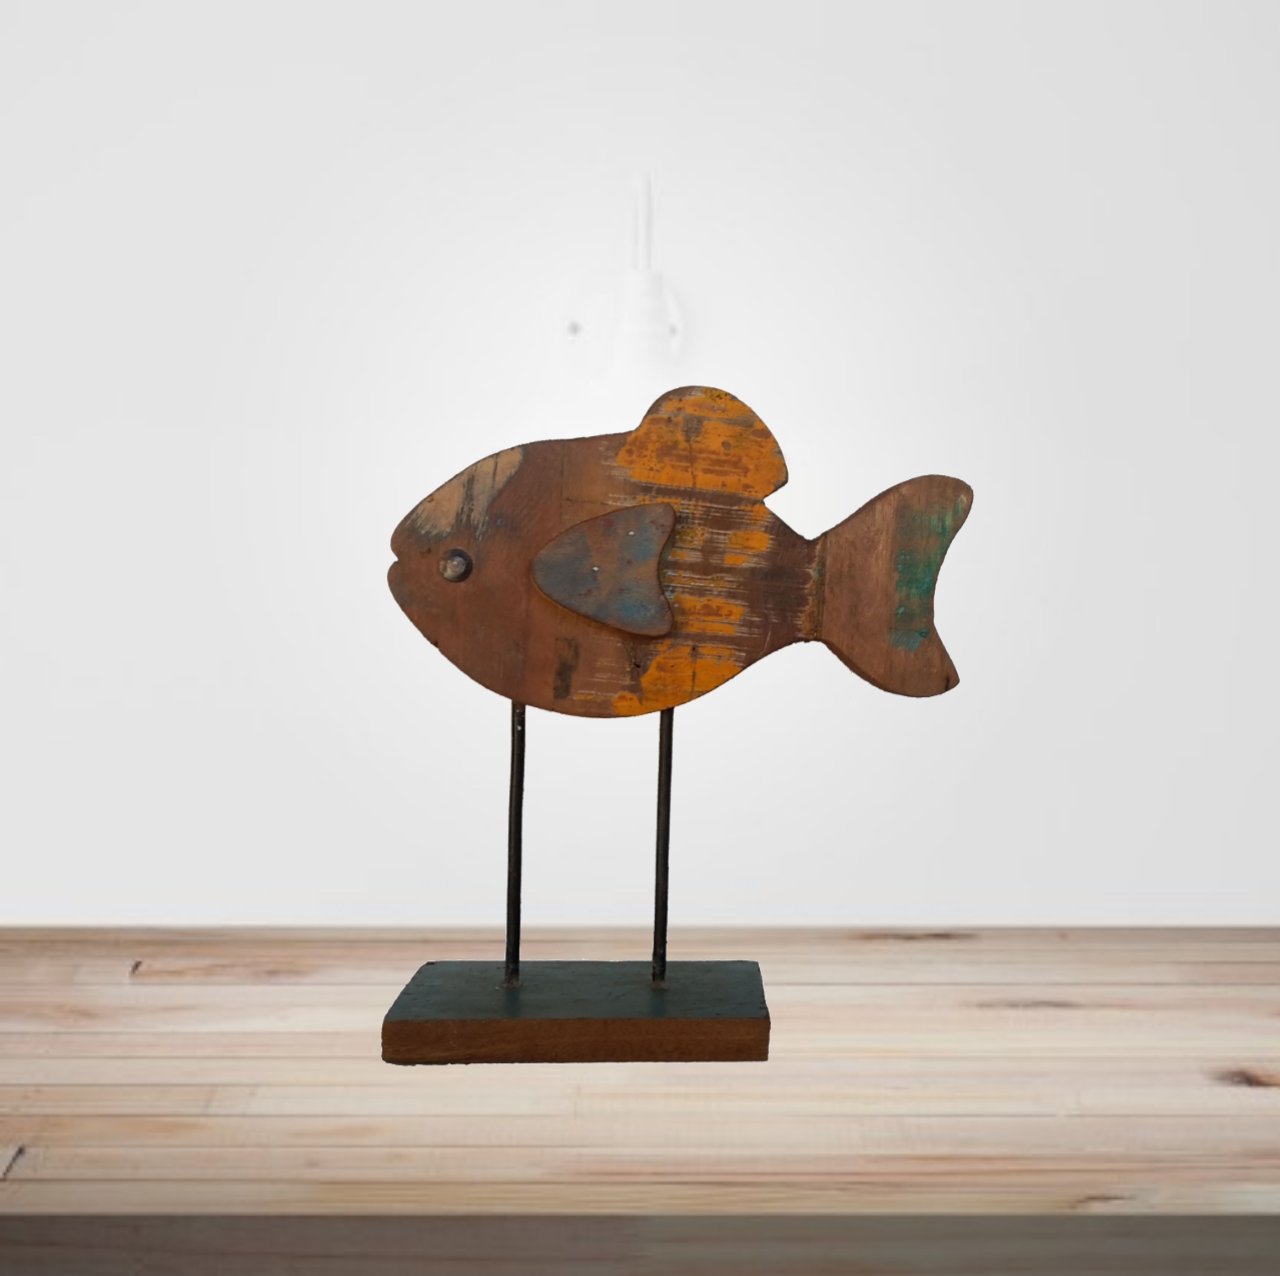 Buy Recycled Wooden Standing Fish Online - Kraphy